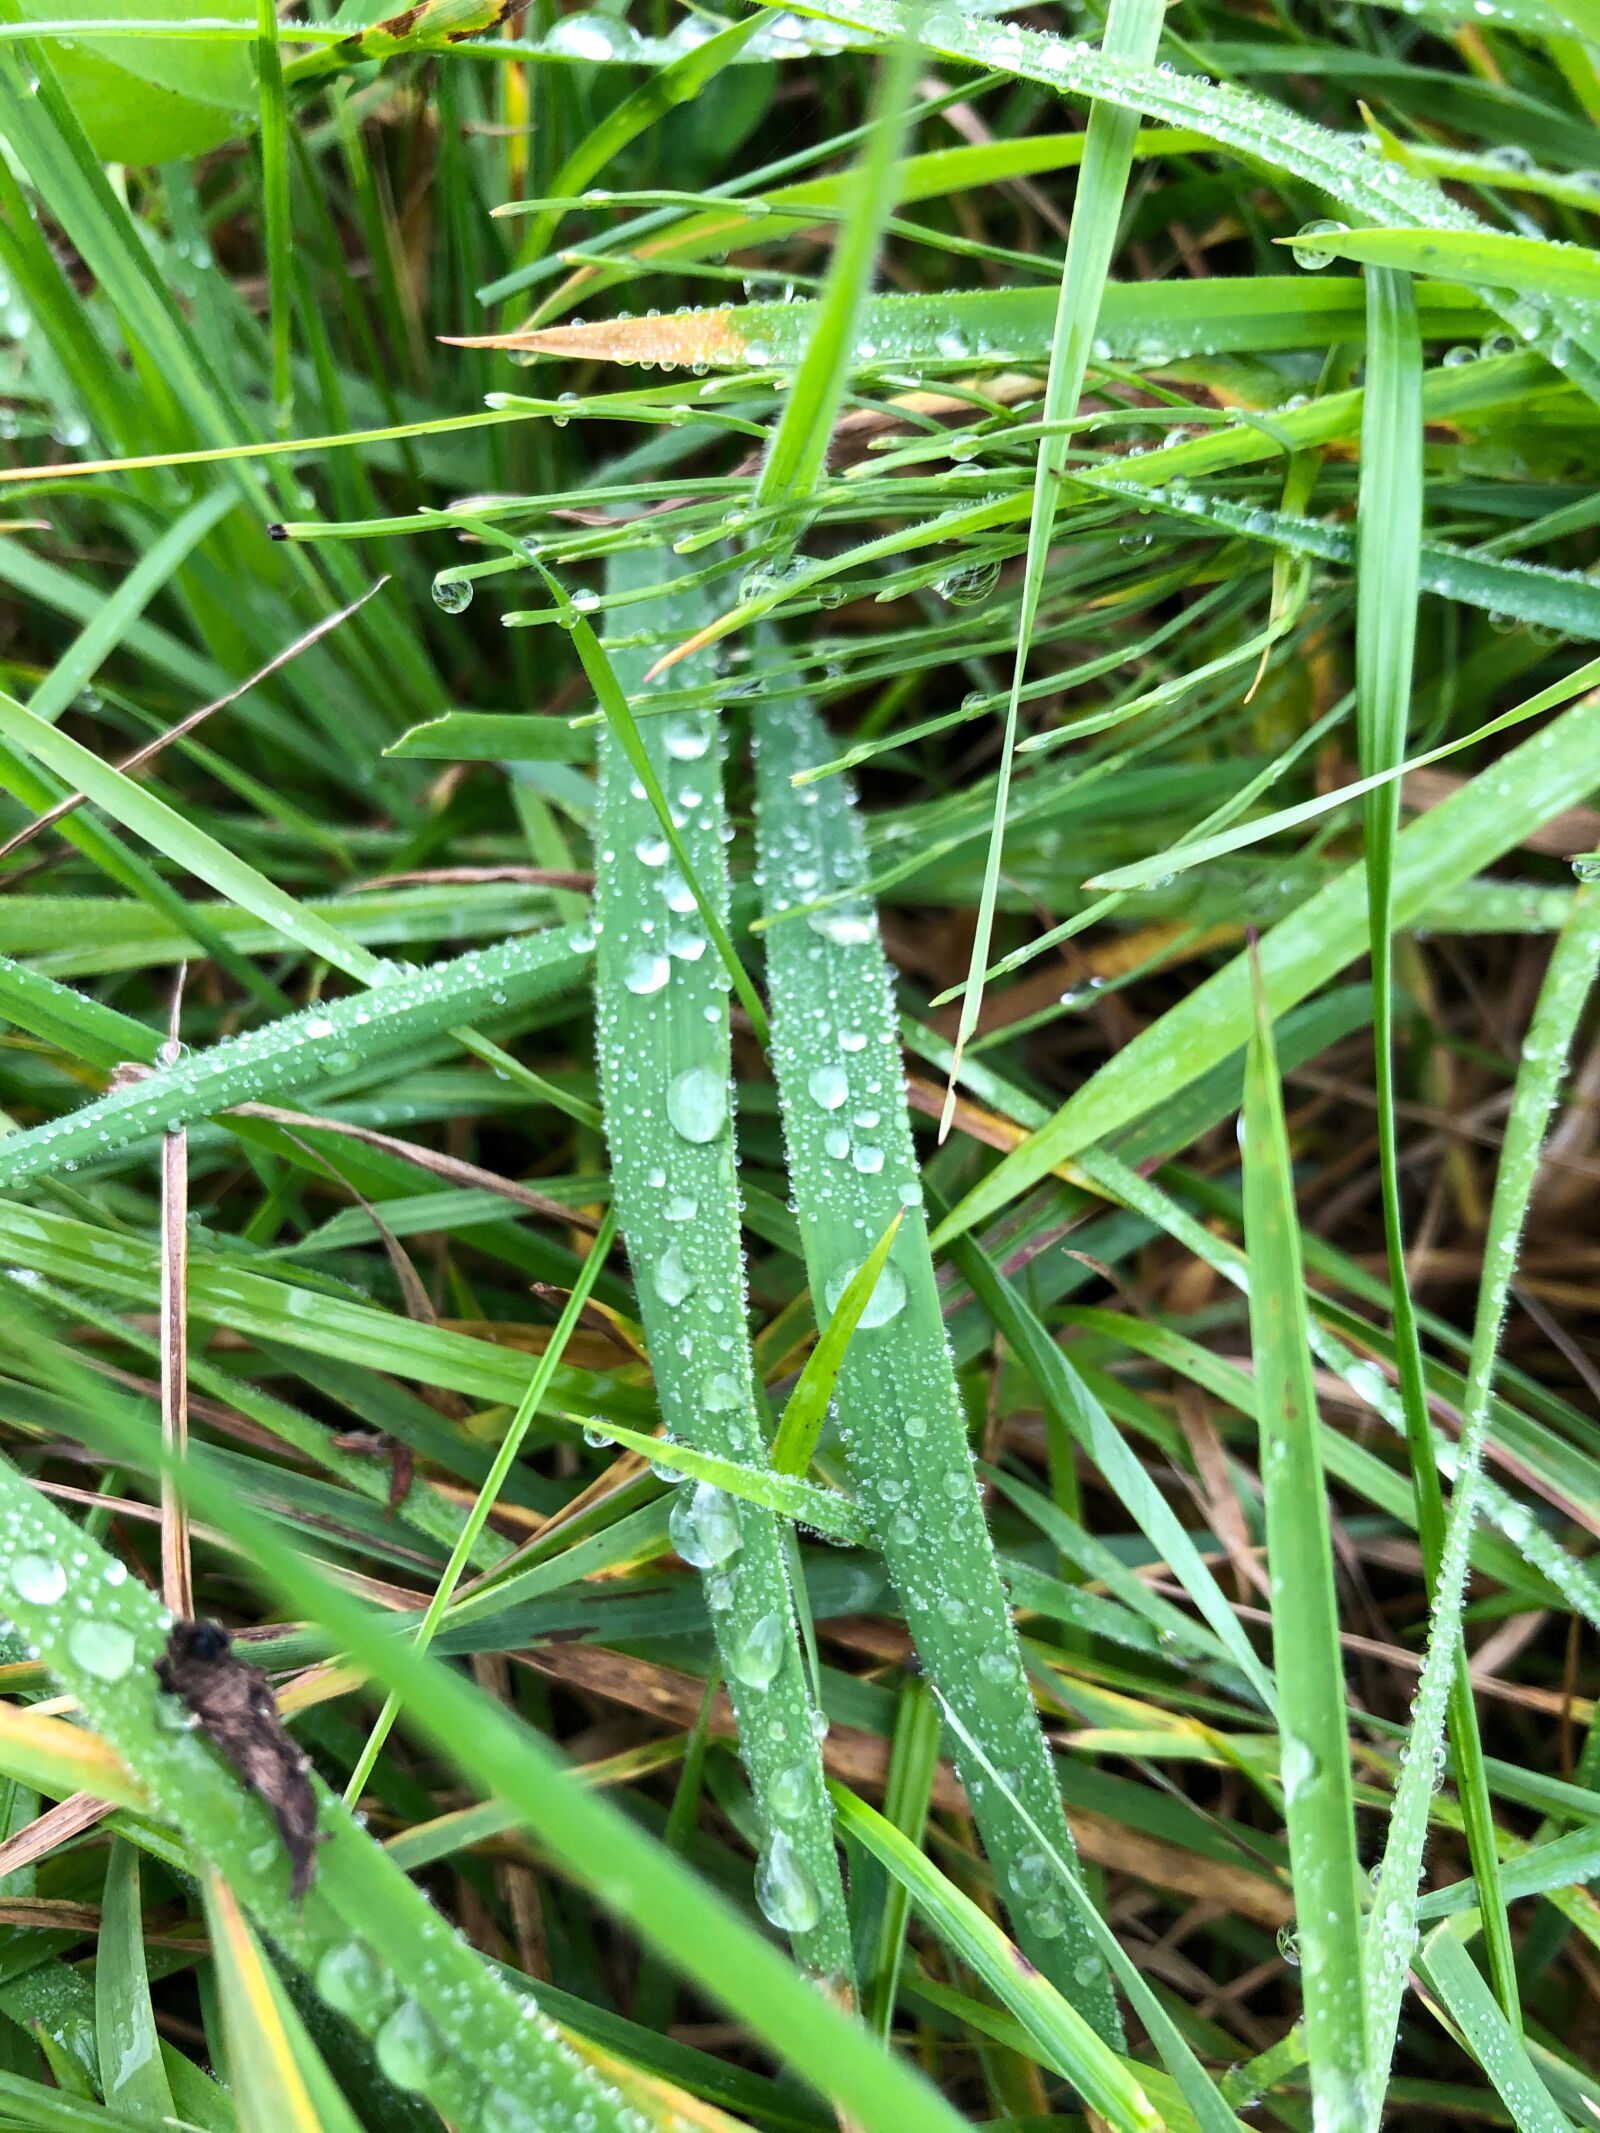 iPhone 8 back camera 3.99mm f/1.8 sample photo. Grass, wet, drip photography